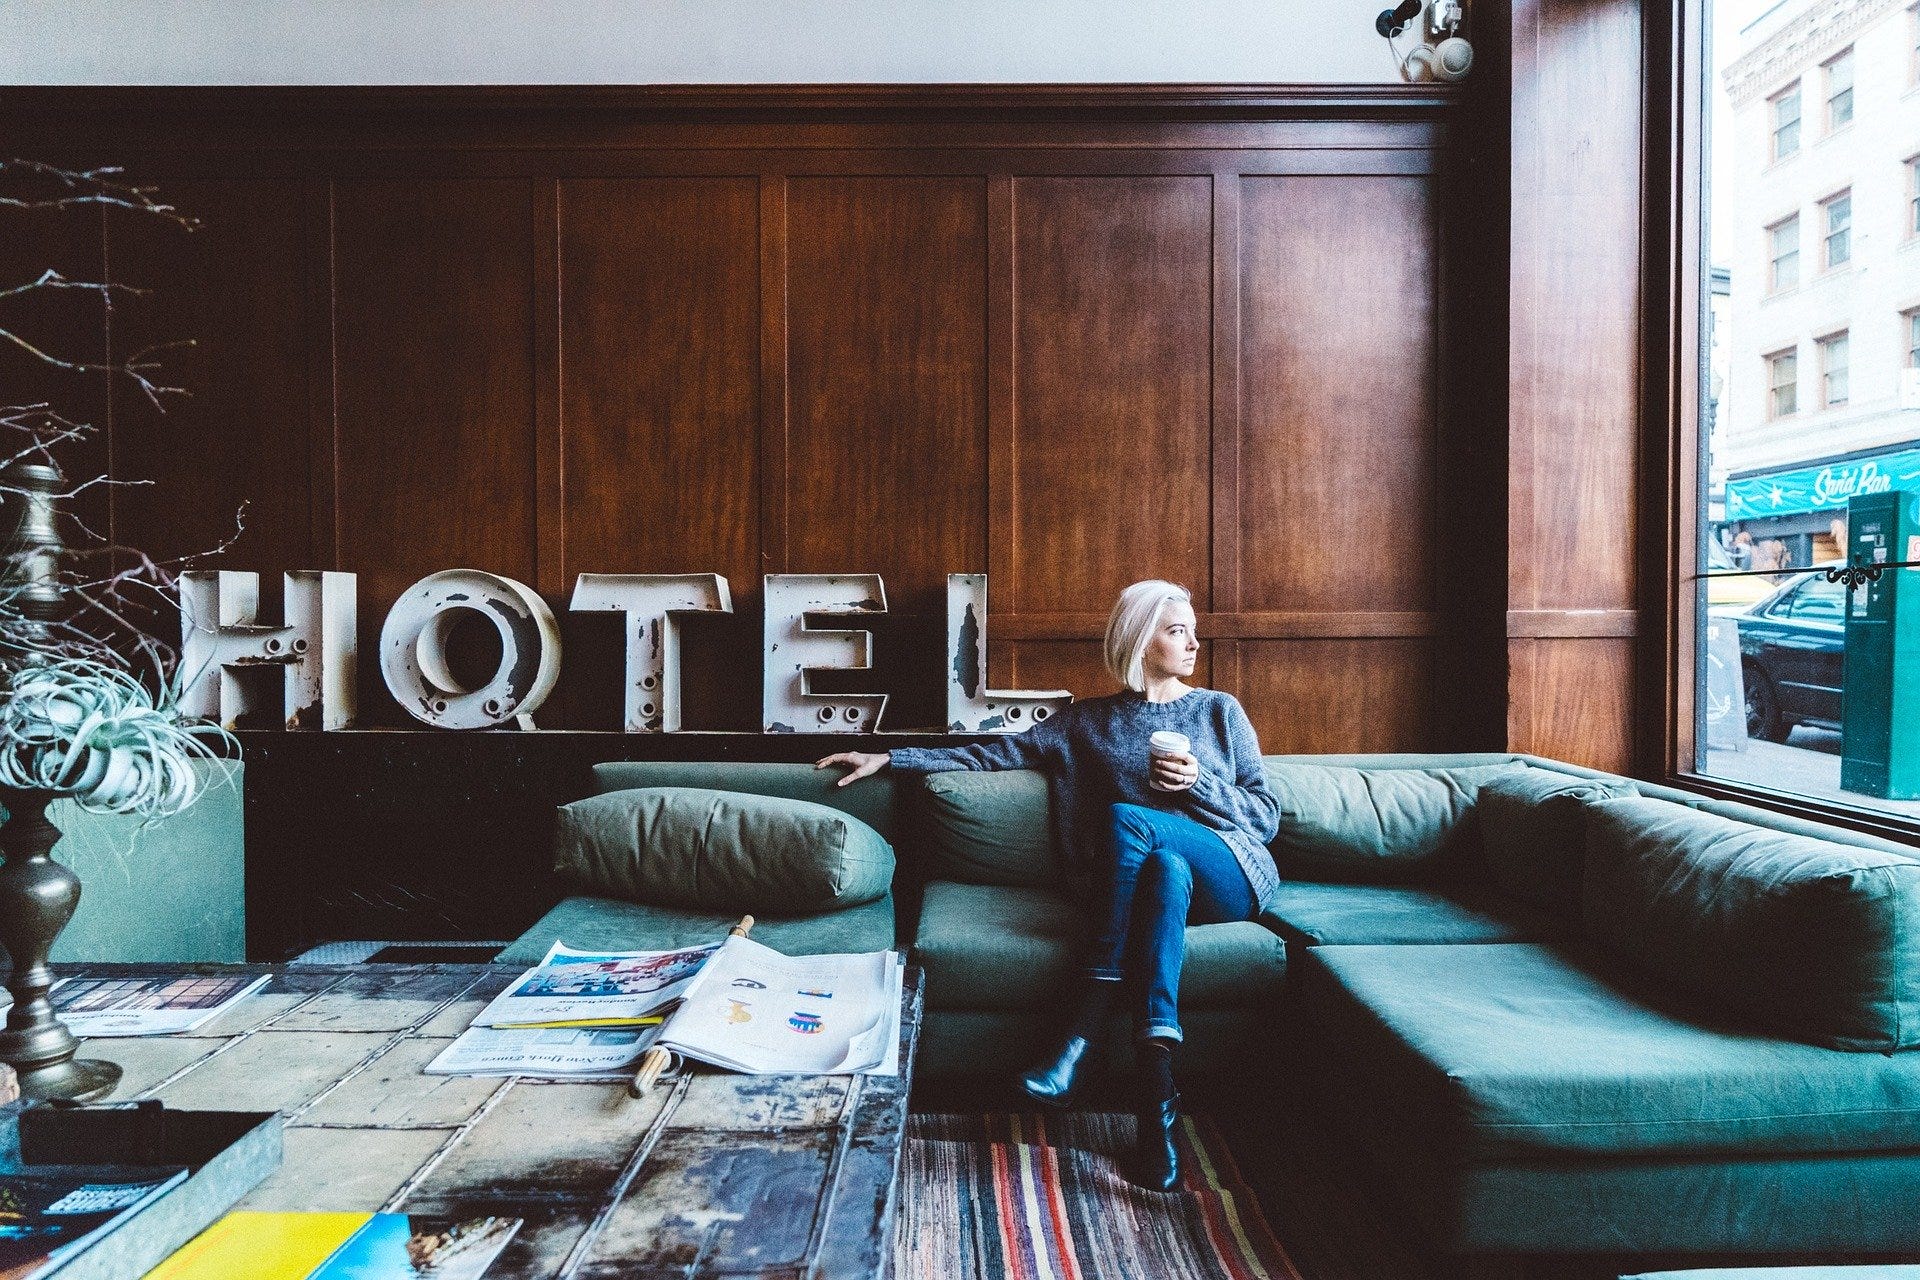 Top 3 Hotel APIs To Use In 2022